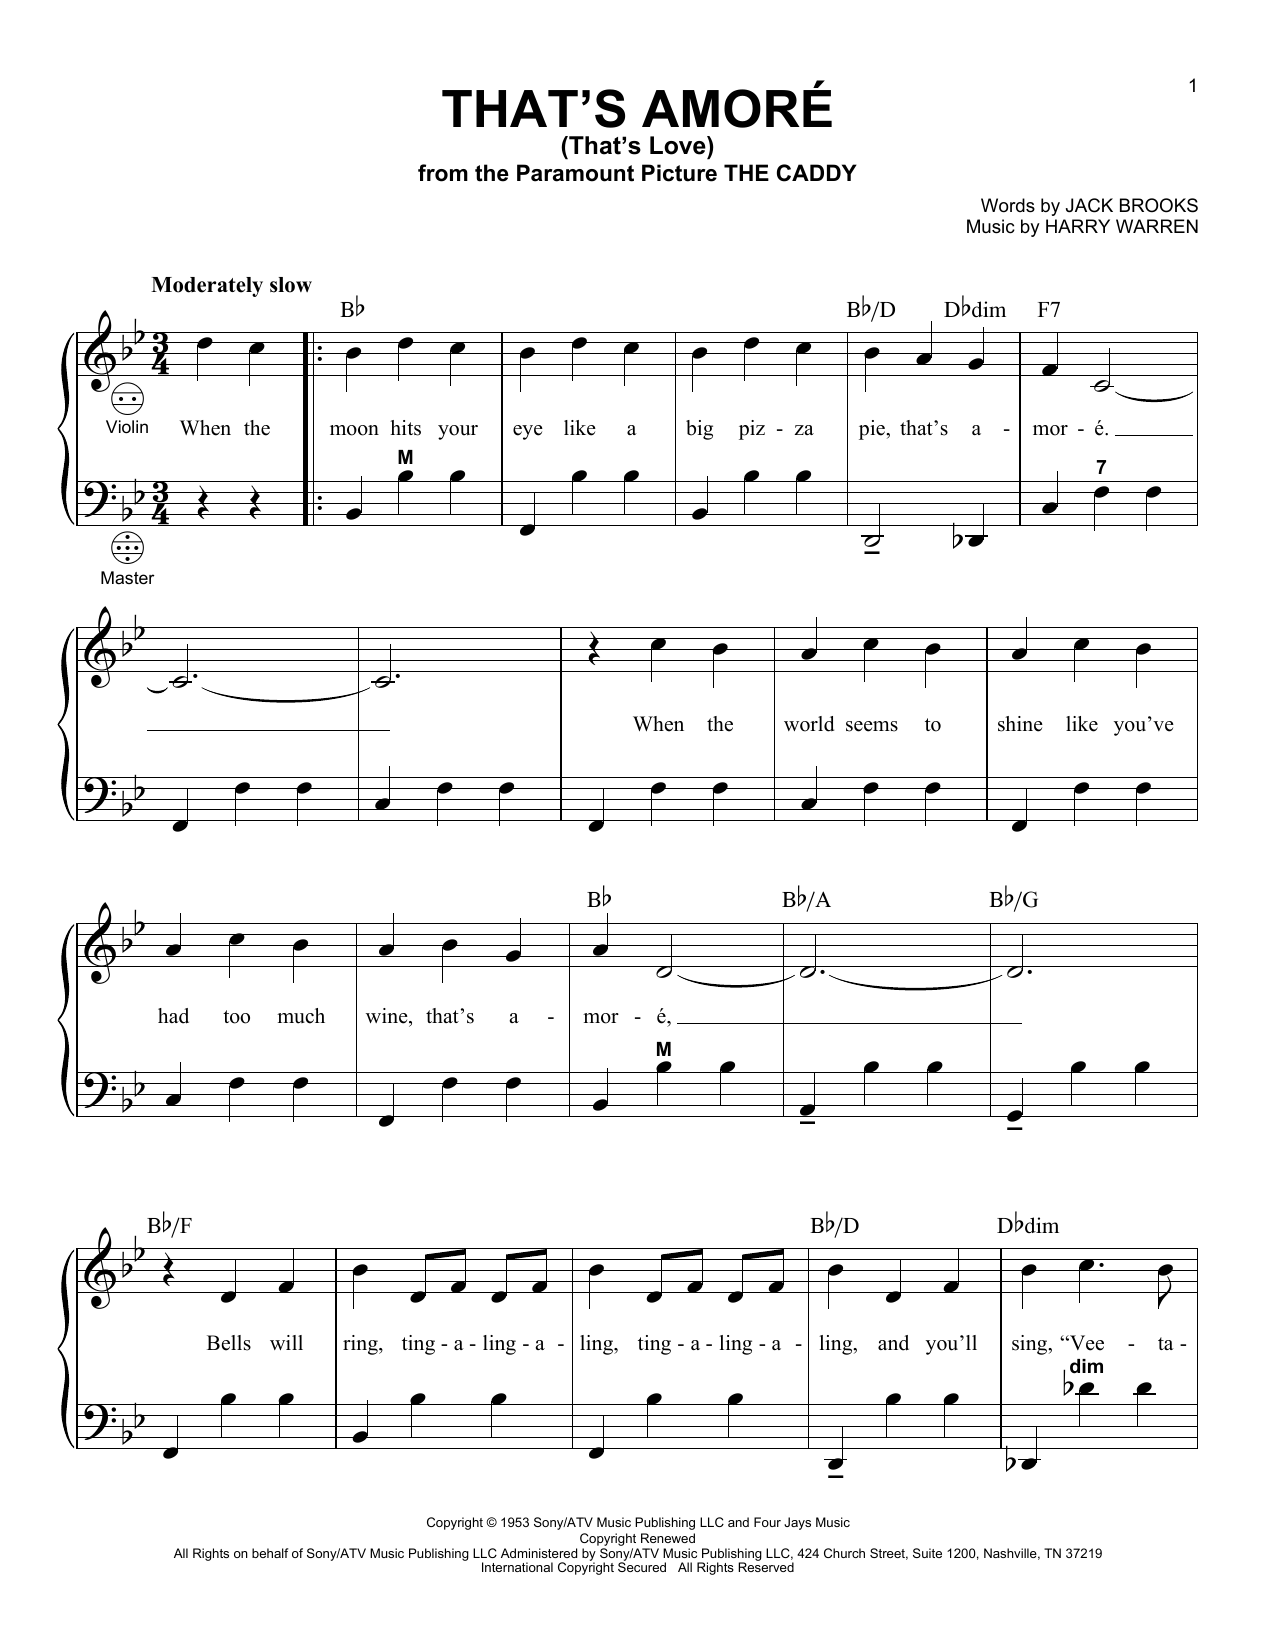 Download Gary Meisner That's Amore (That's Love) Sheet Music